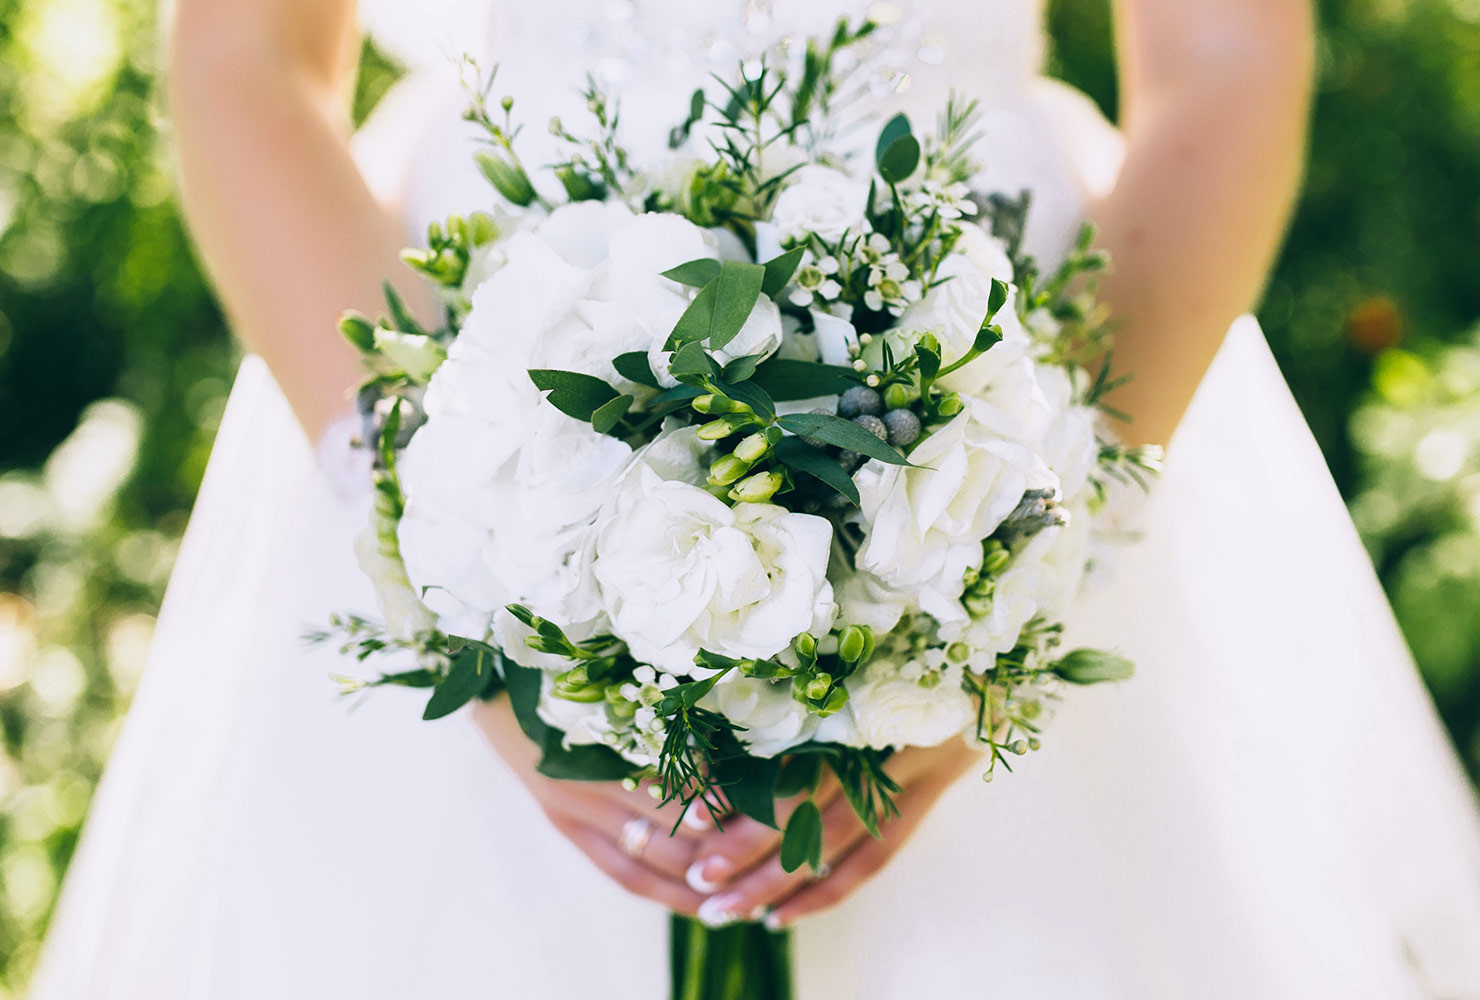 Popular Flowers For Weddings
 The 15 Most Popular Wedding Flowers In 2019